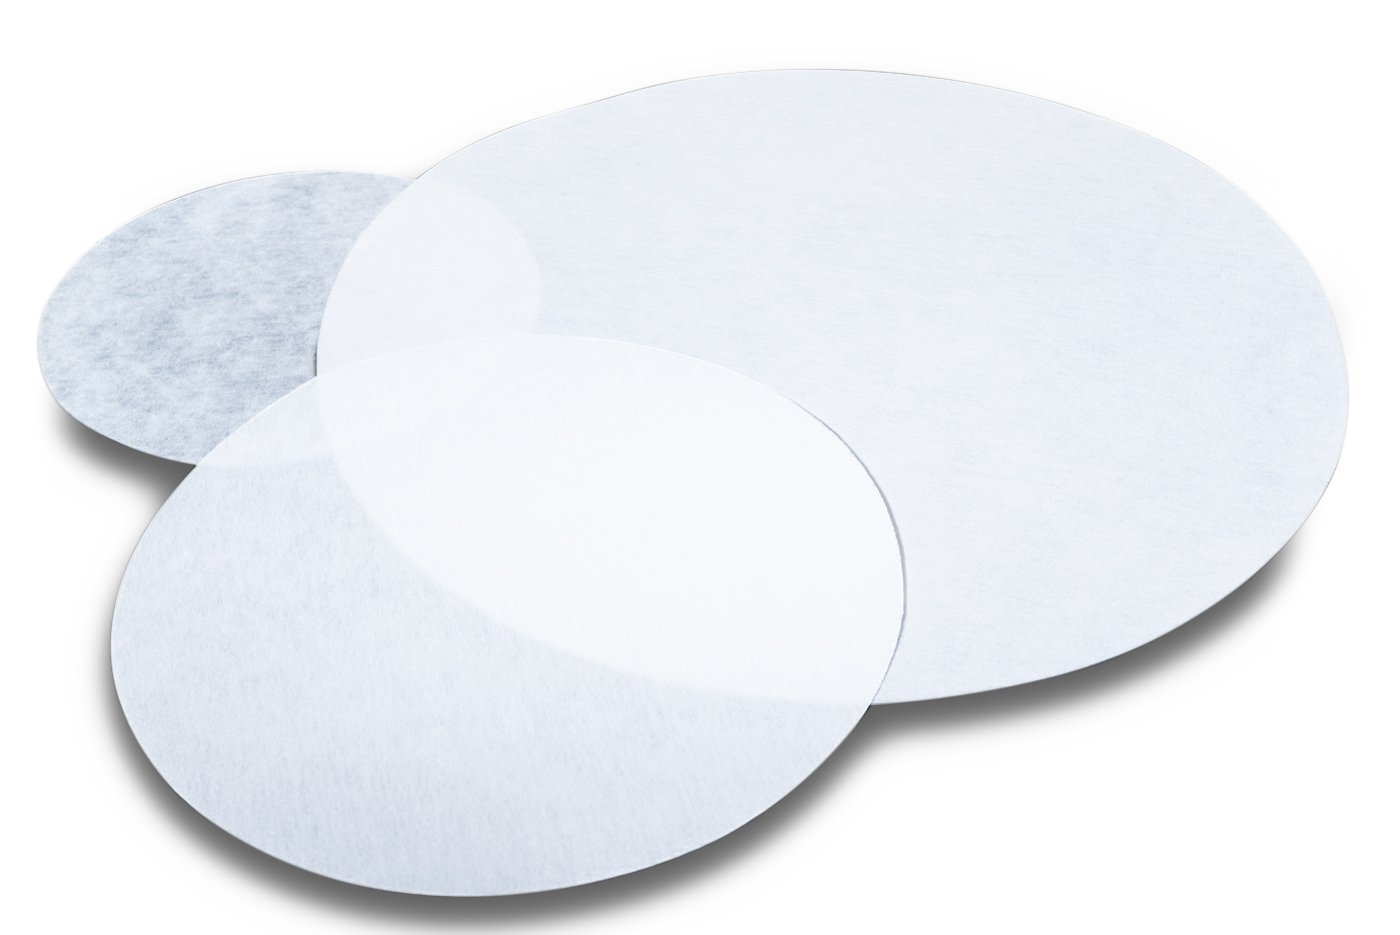 Cellulose Filter Paper 50 Micron - 5 Pack Shop All Categories BVV 6-inch